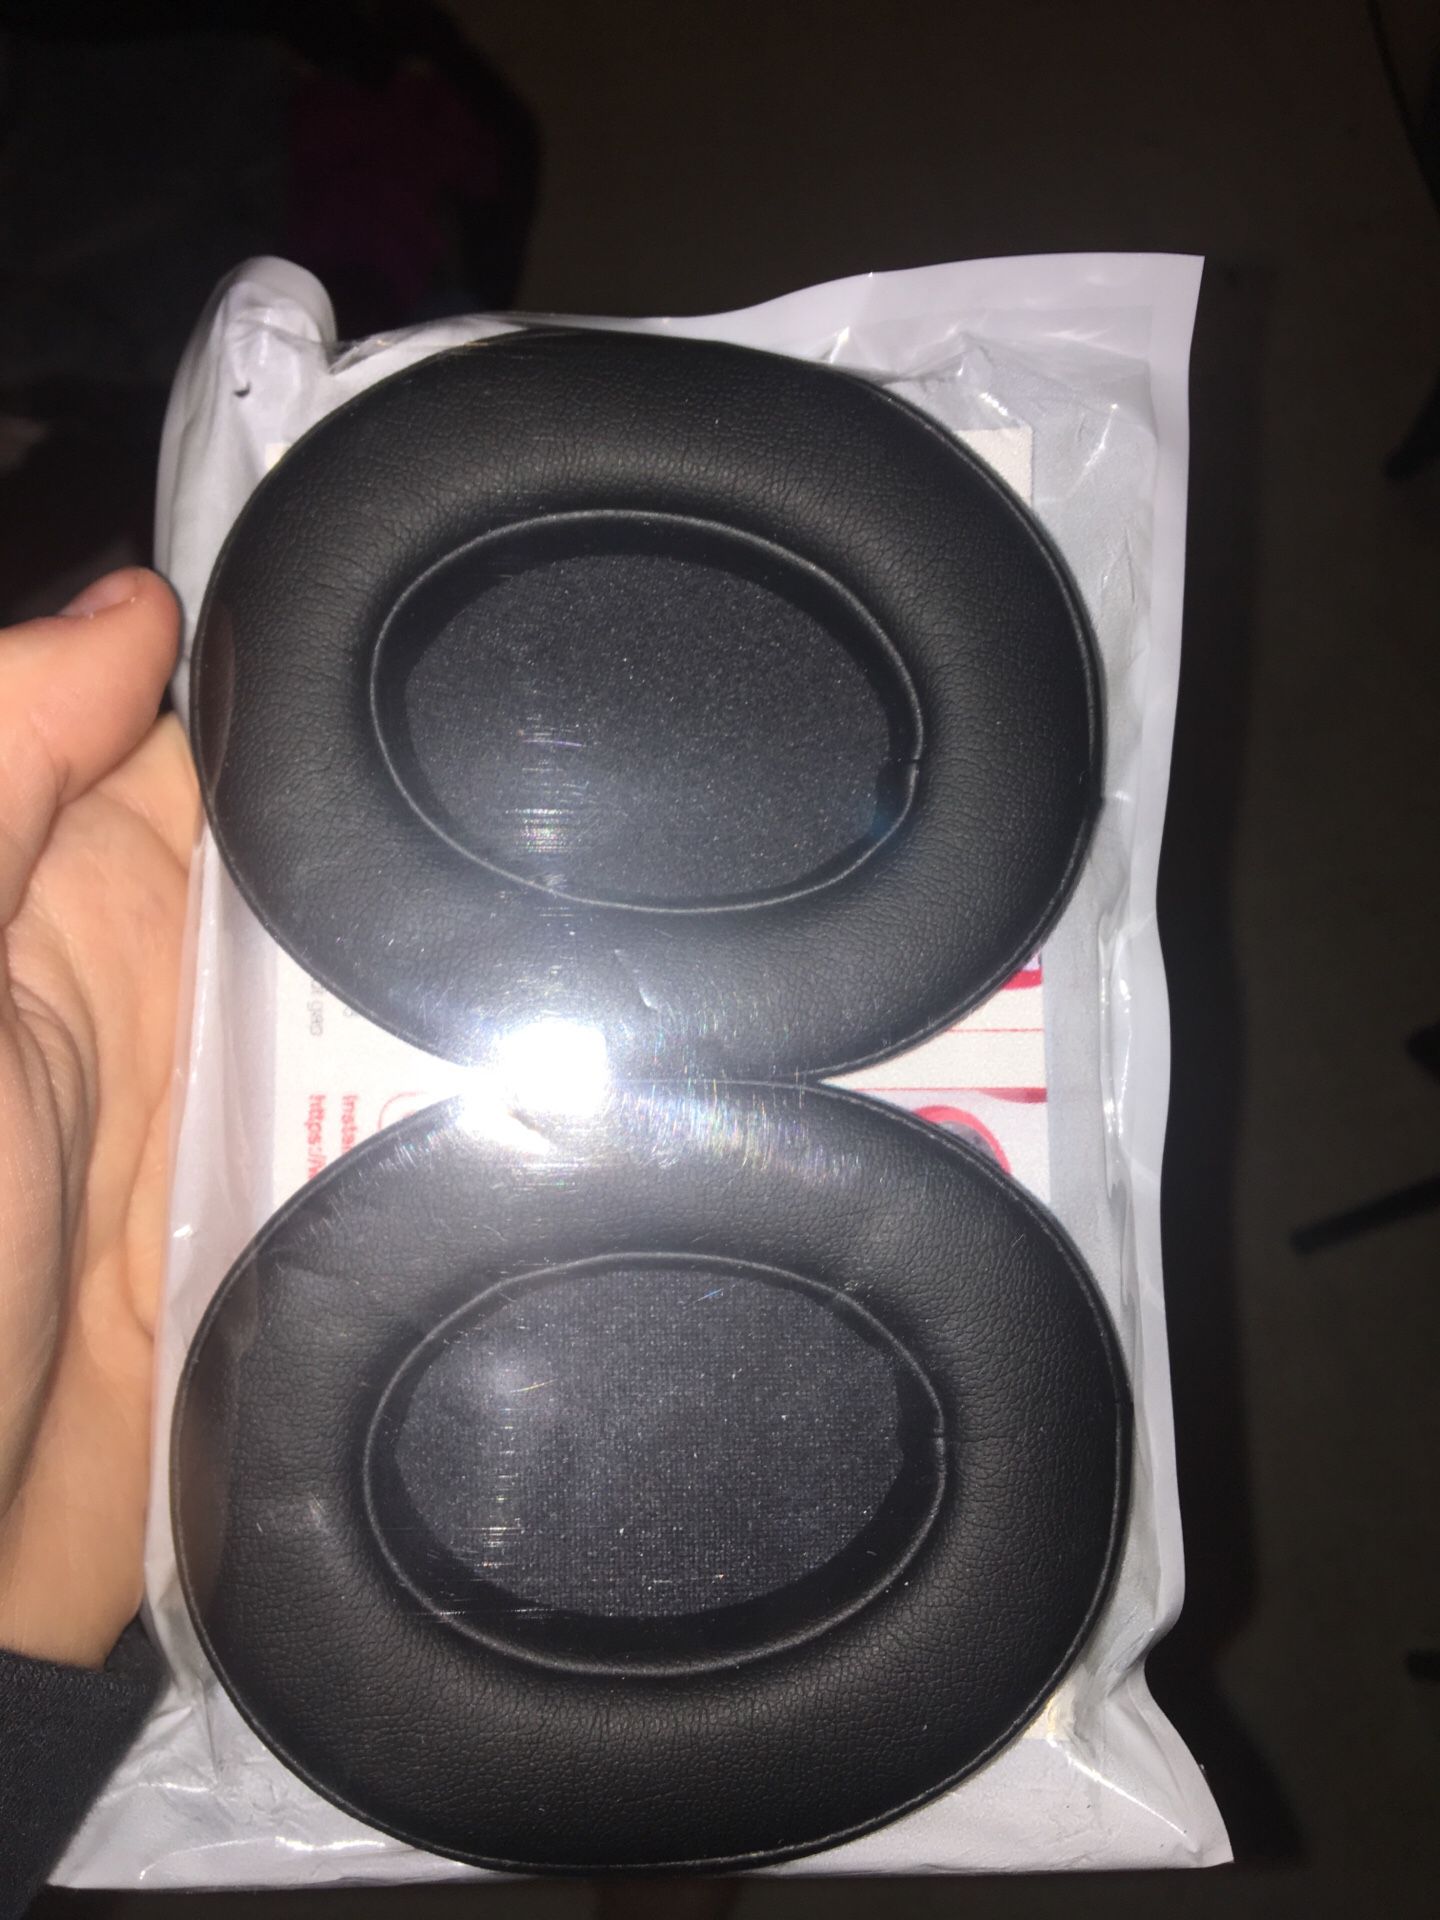 Beats studio 3’s new covering for the speakers